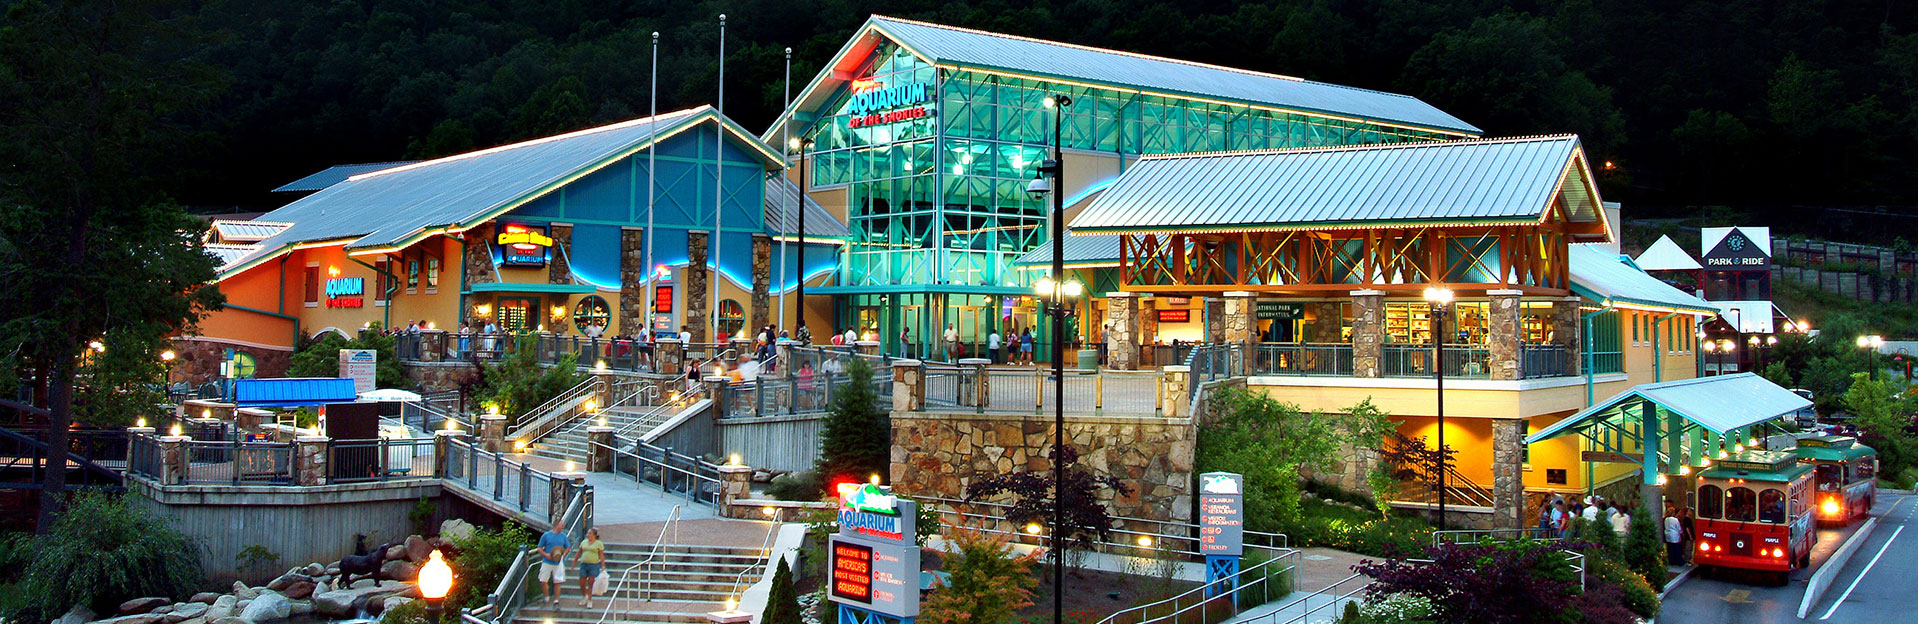 Gatlinburg Attractions The Official Site of Downtown Gatlinburg.